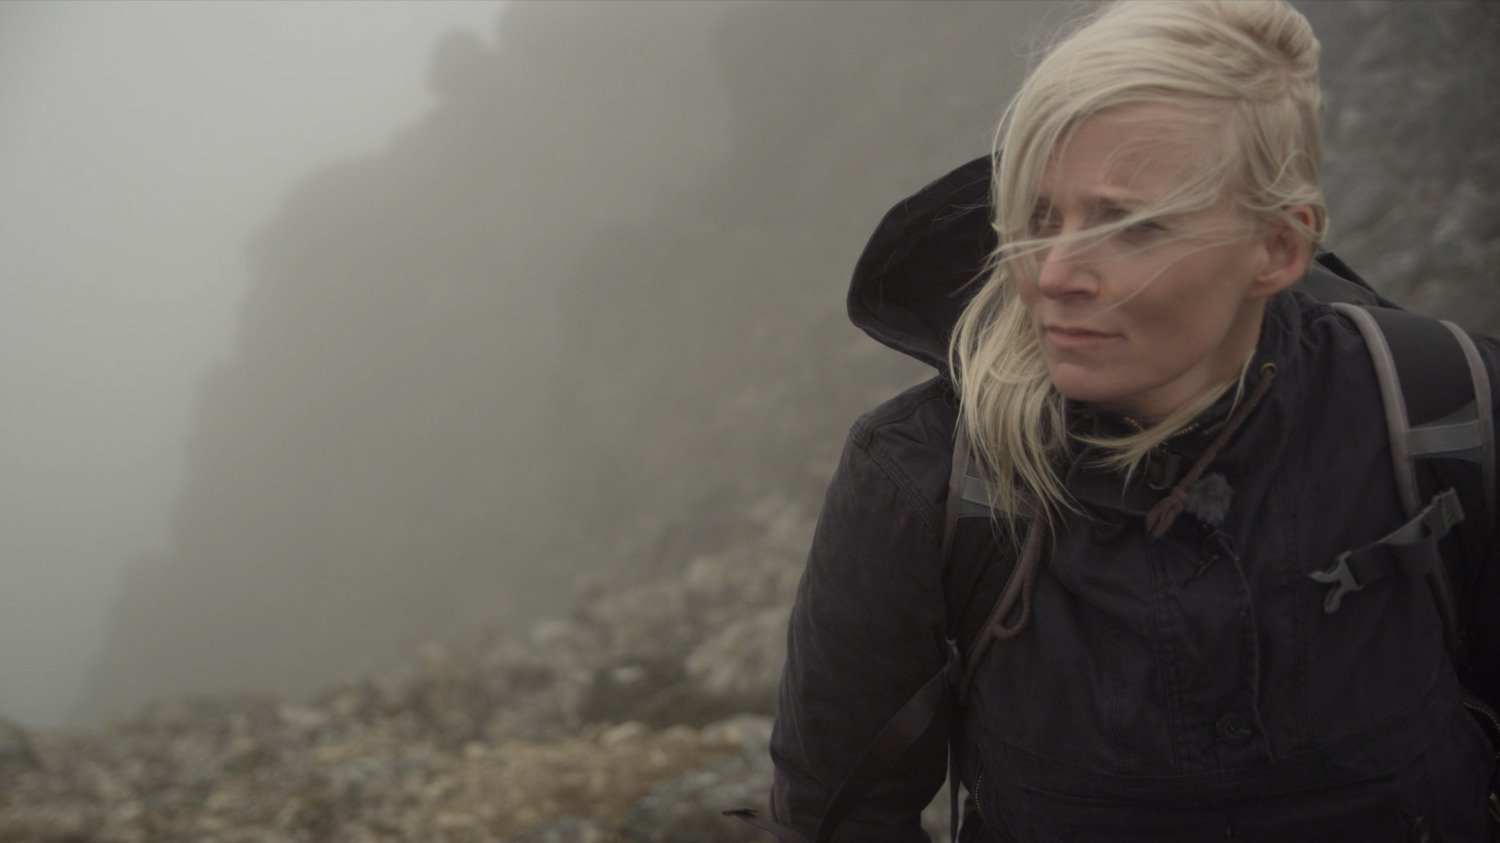 Bea Uusma on Fuglesangen, an island belonging to Svalbard, during the last expedition in Andrée's footsteps.